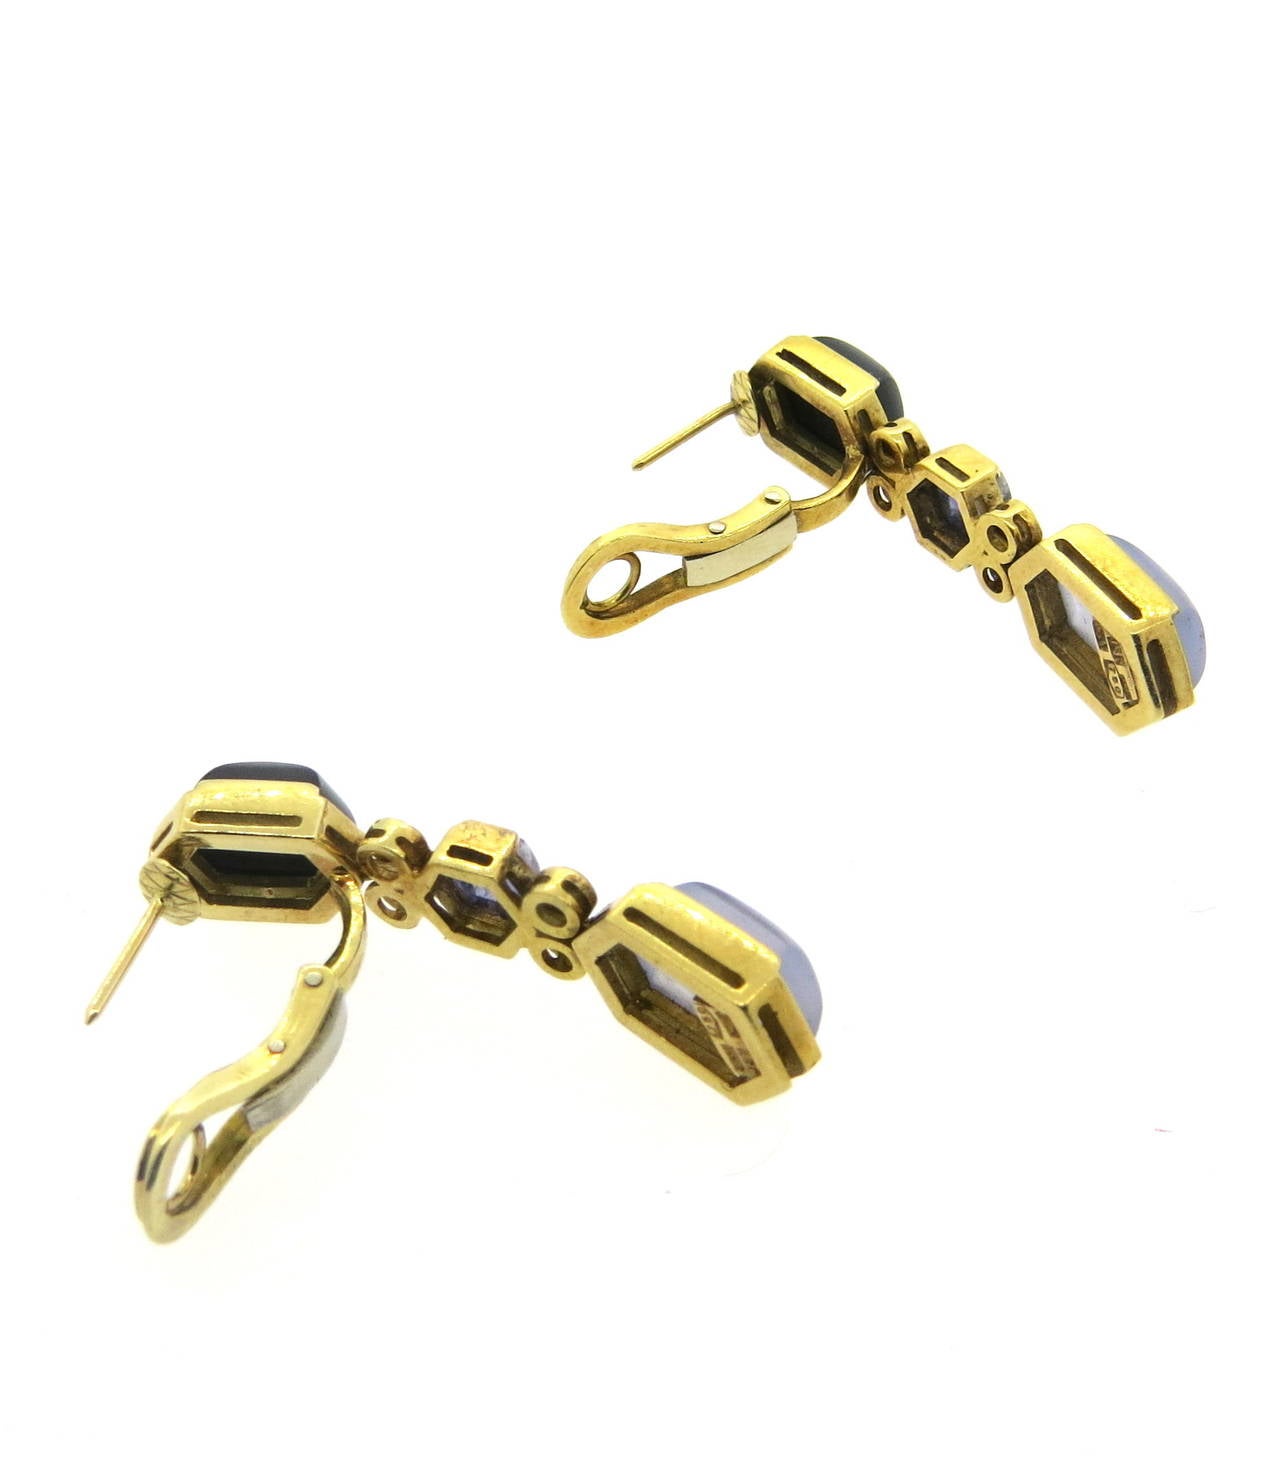 A pair of 18k yellow gold earrings set with approximately 0.80ctw in G/VS diamond along with iolite onyx and chalcedony stones.  The earrings measure 43mm x 10mm and weigh 20.3 grams